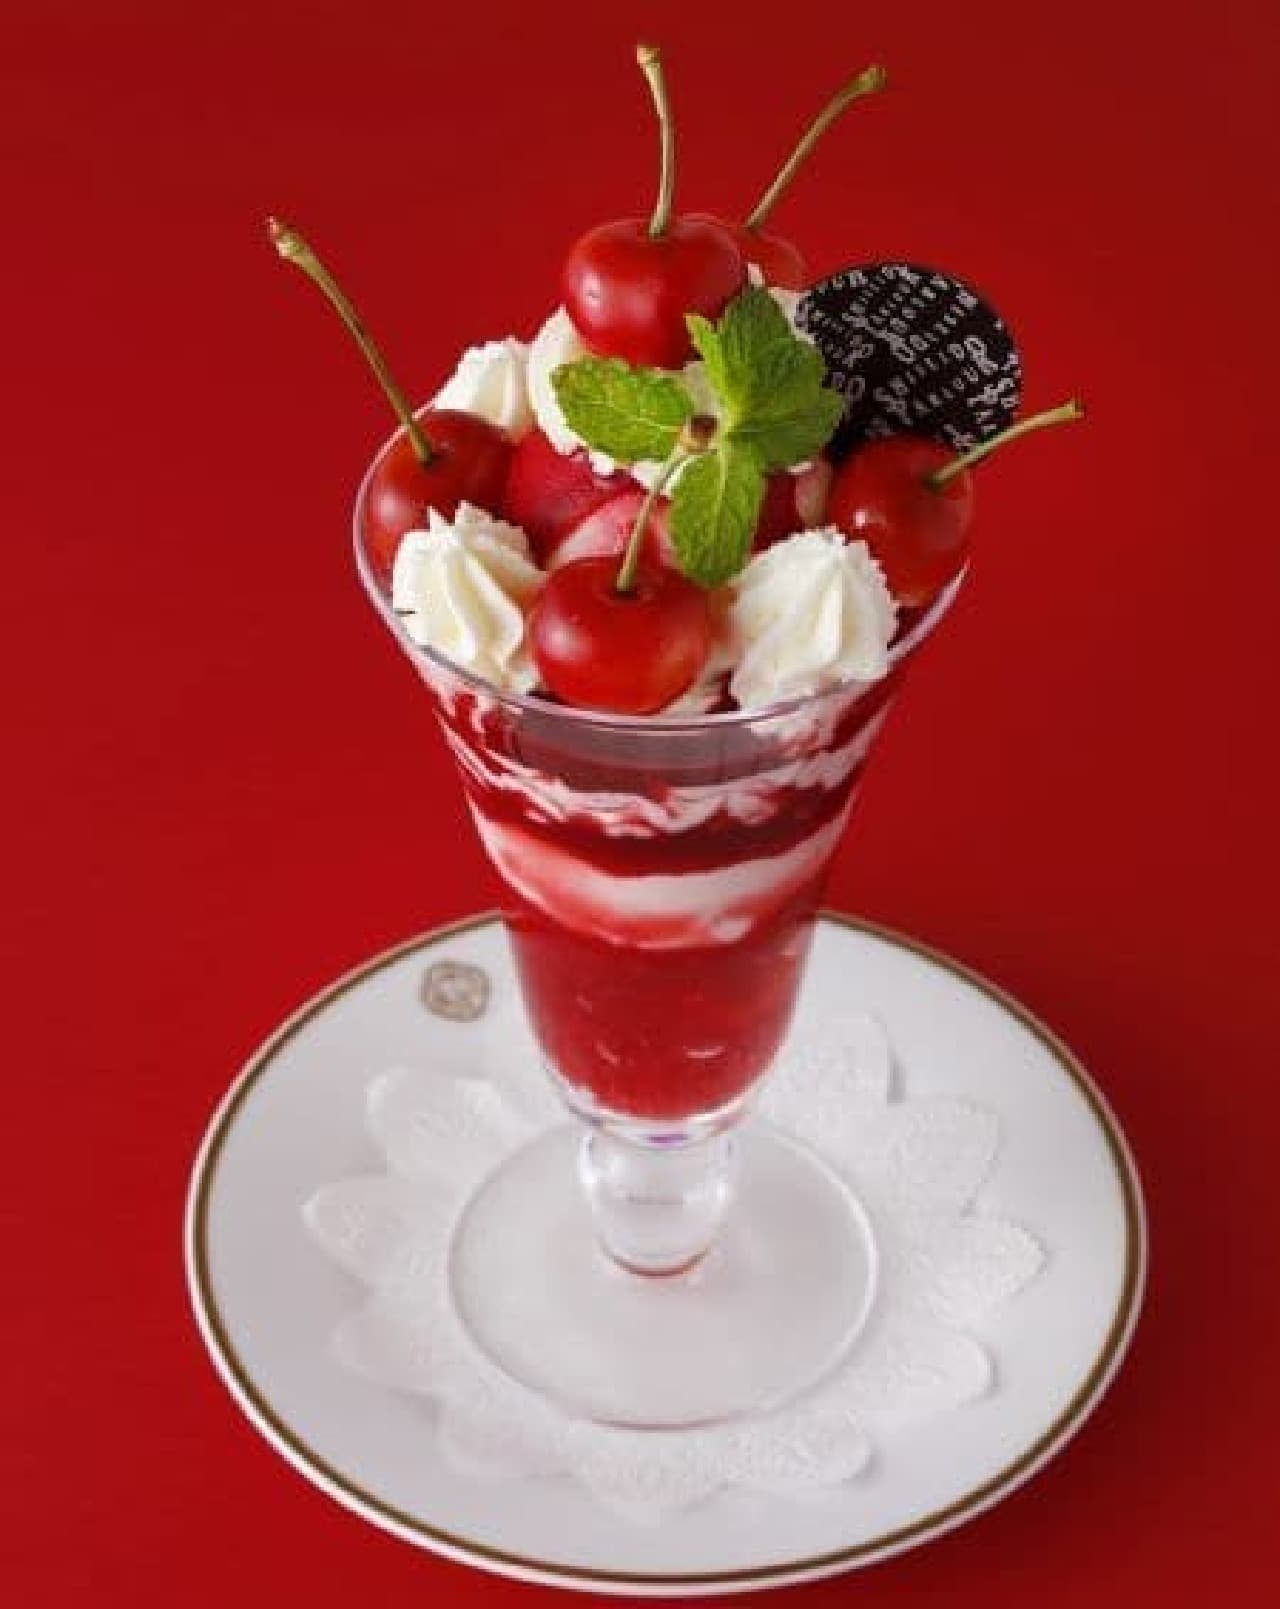 A parfait made with luxurious Yamagata cherries "Sato Nishiki" is on sale from Shiseido Parlor.